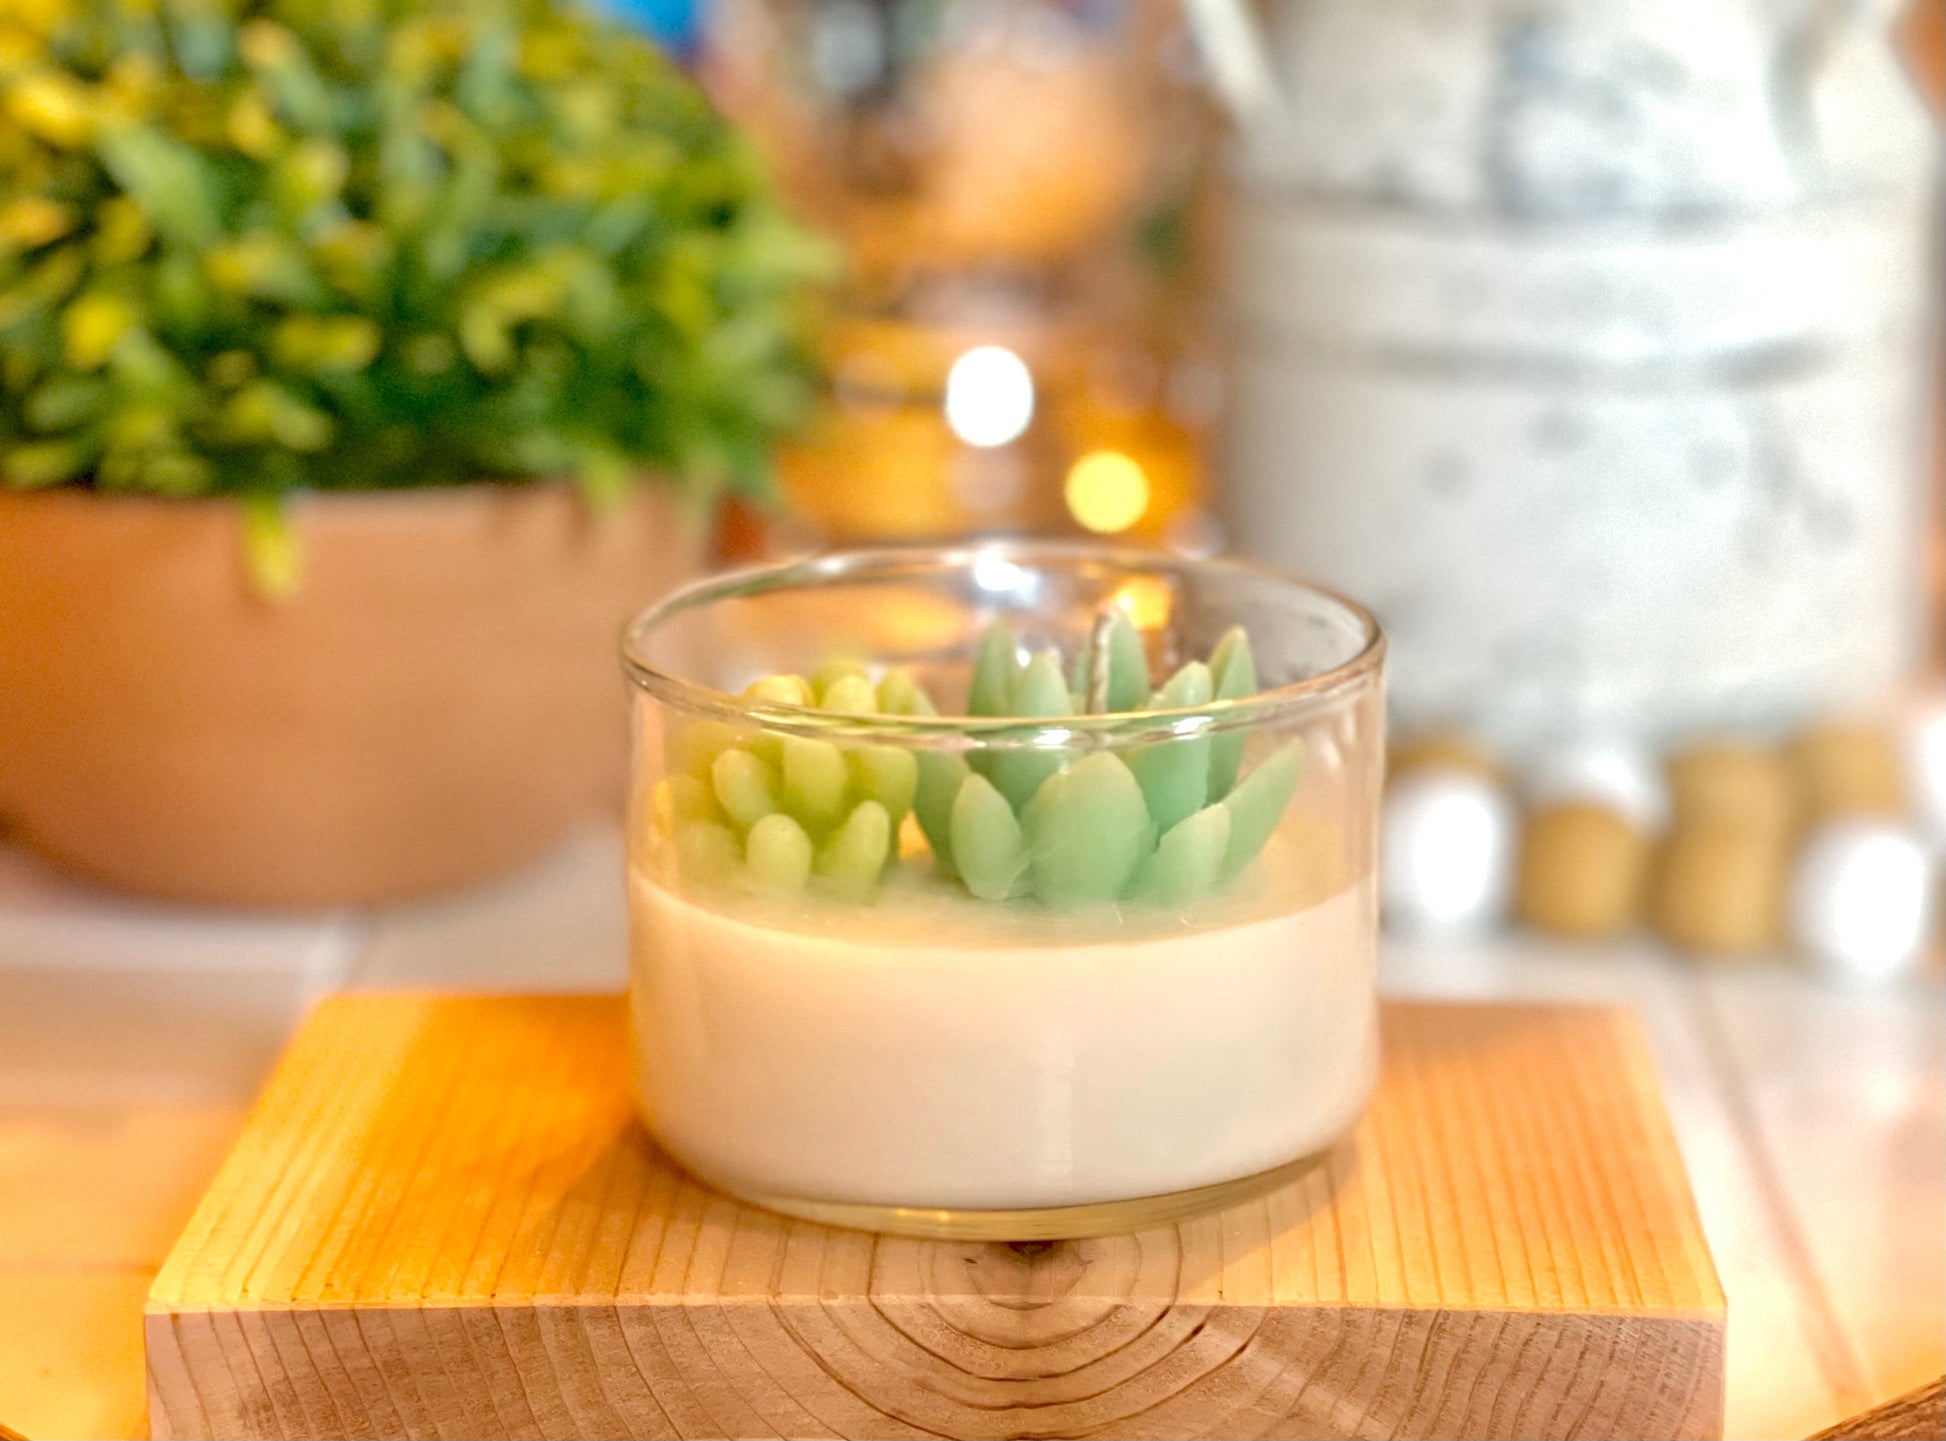 Succulent Candle | Room Decor | Soy Candle | Many Scents Available - 2n2ranch